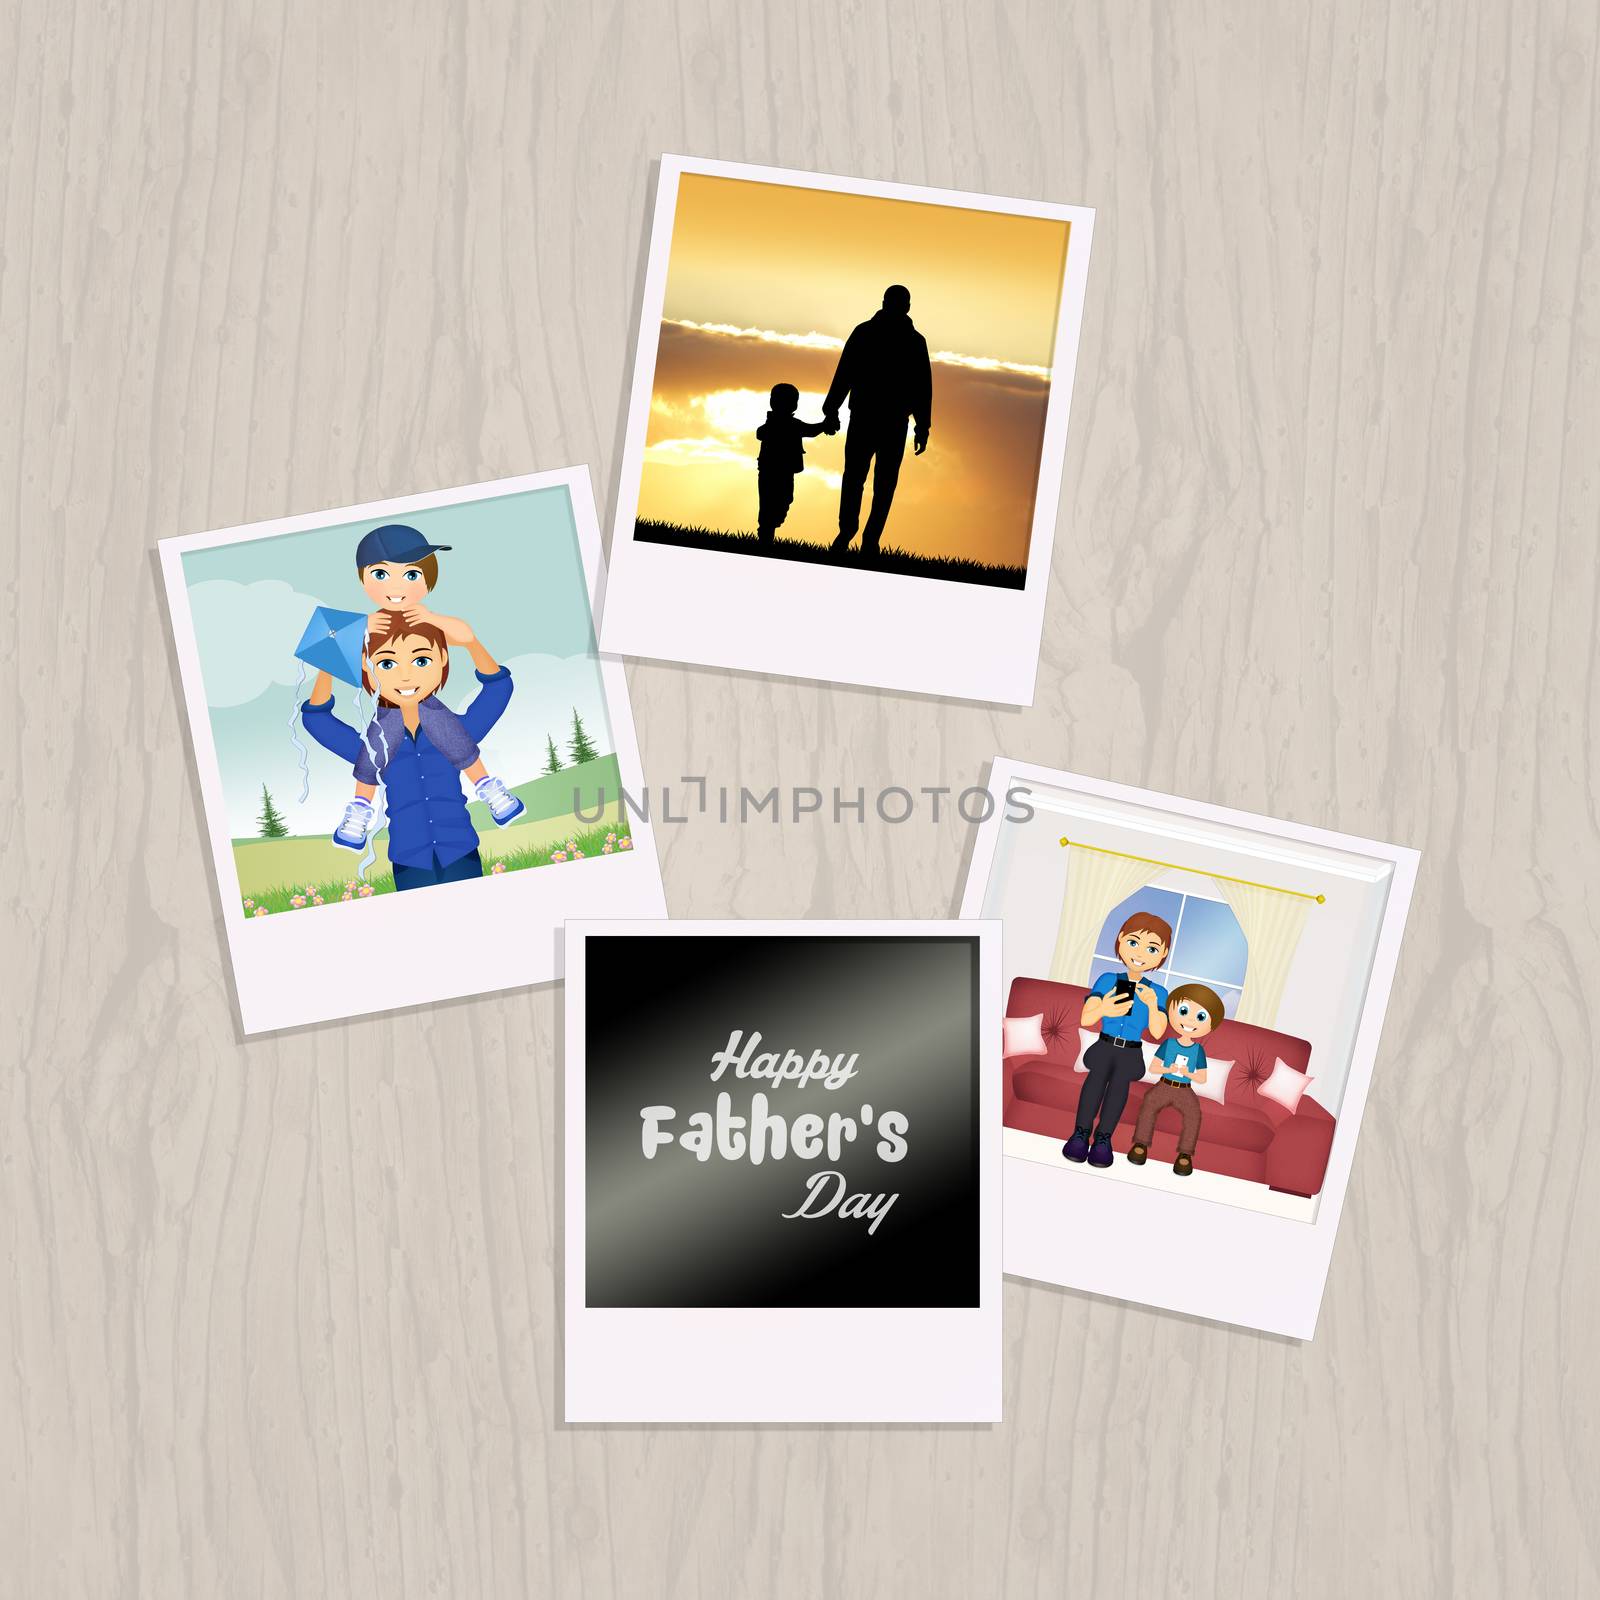 pictures of family for father's day by adrenalina